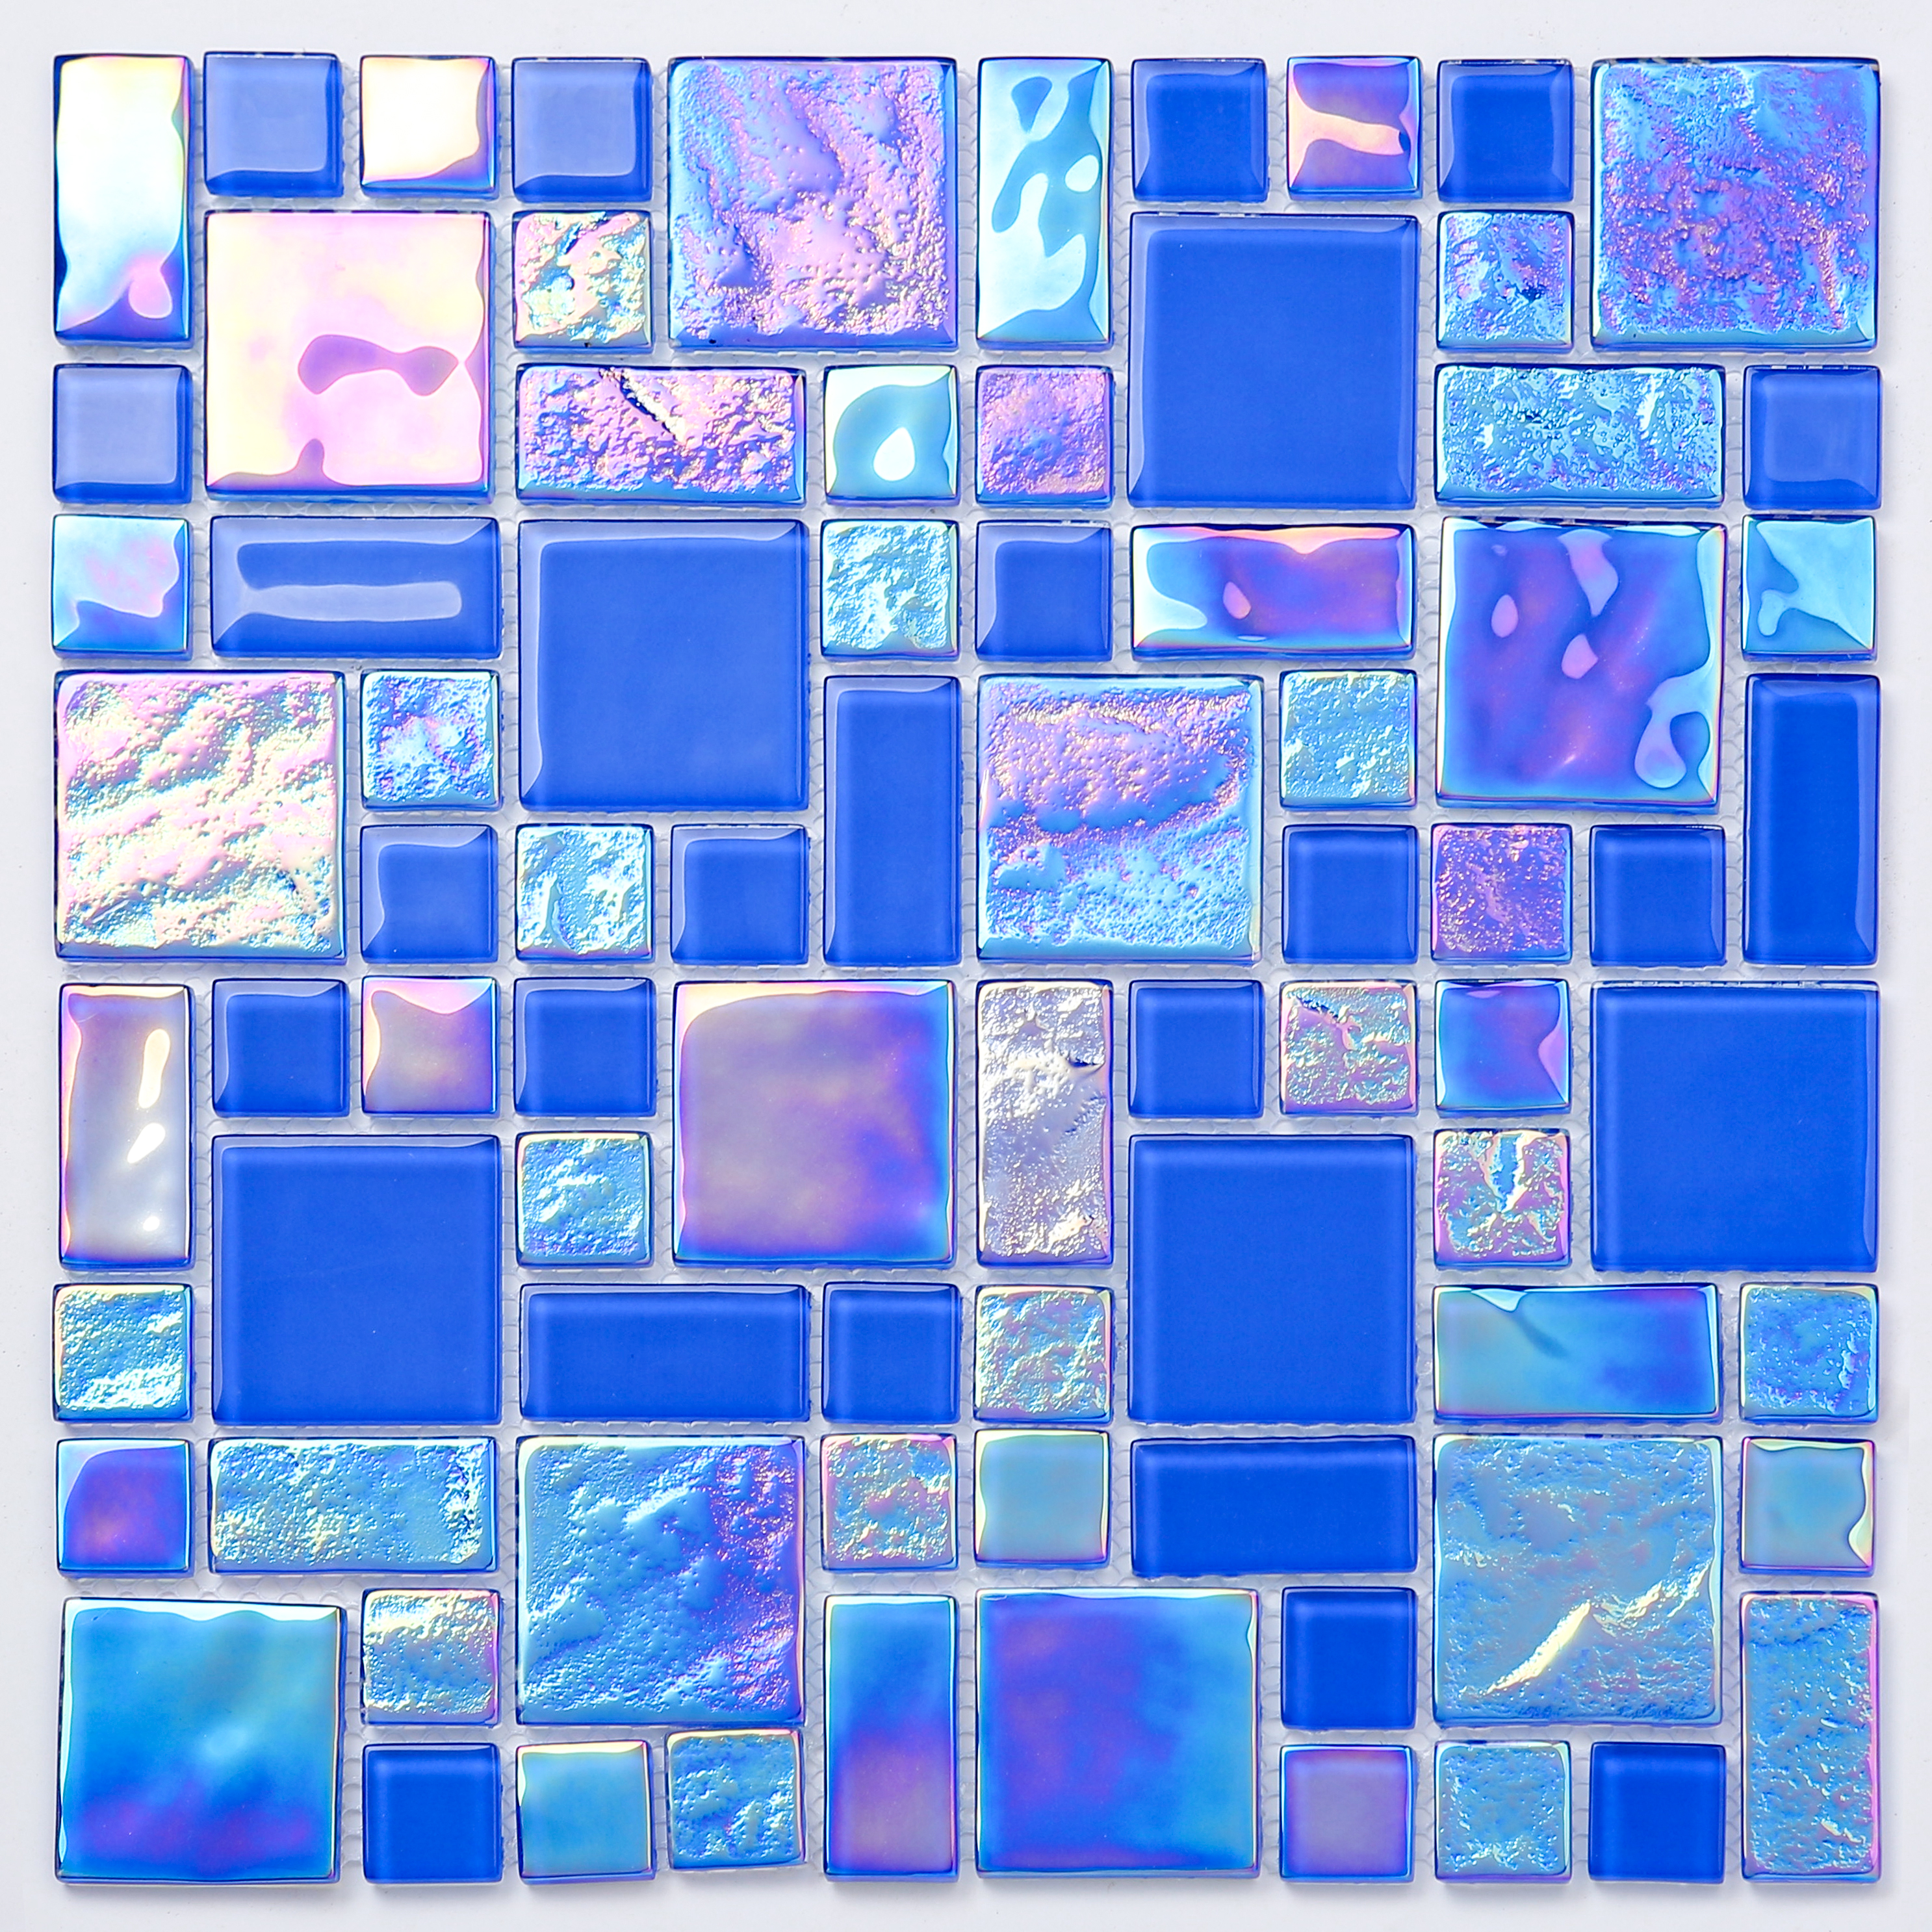 Why are Swimming Pool Tiles Mostly Blue?